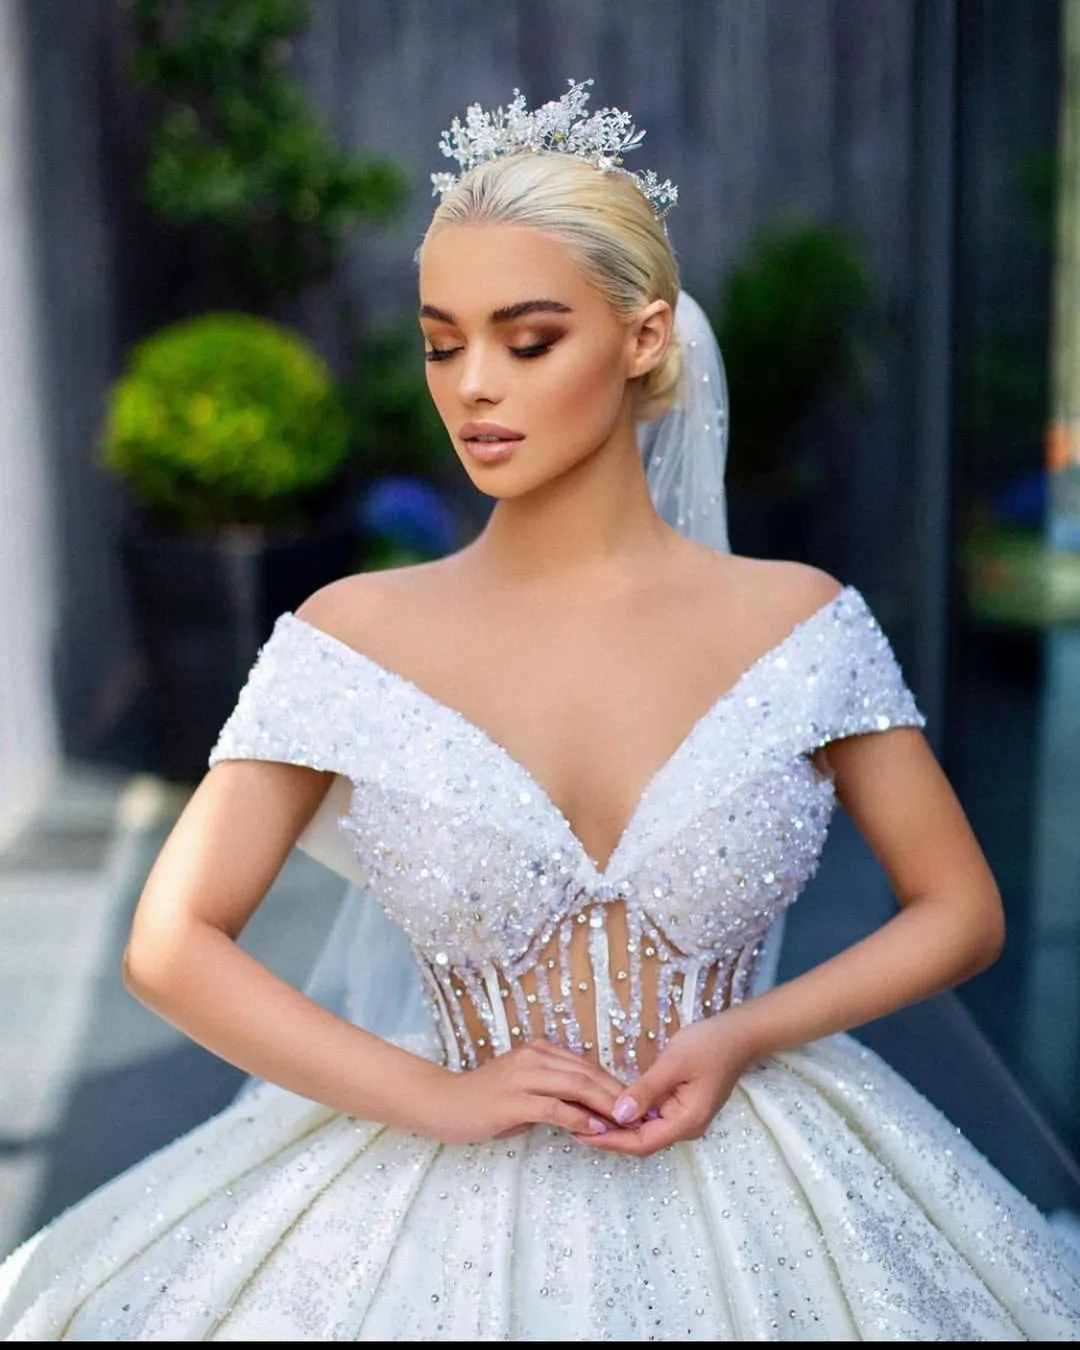 Luxurious Ball Gown Wedding Dresses V-neck Off the Shoulder Backless with Shining Beaded Illusion Bodice Court Gown Custom Made Plus Side Vestidos De Novia